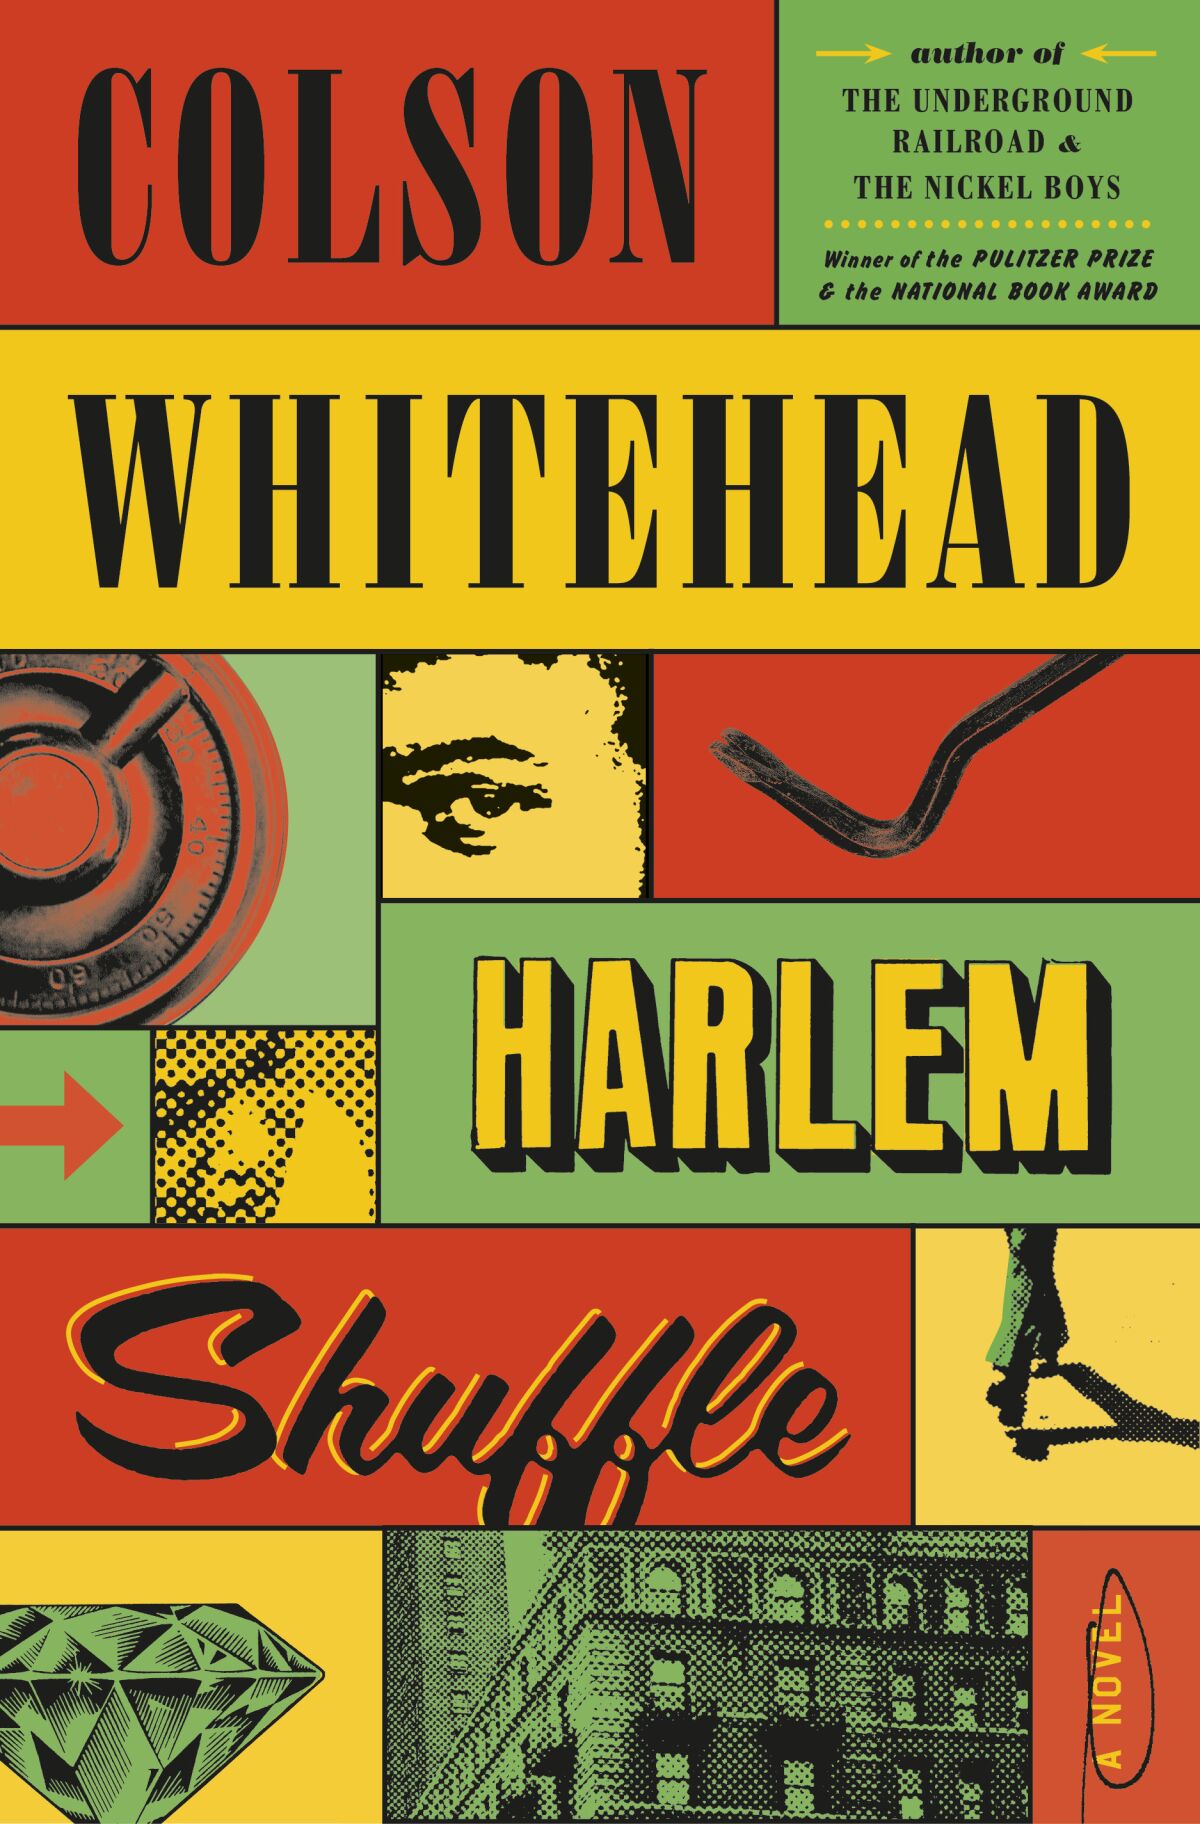 The red, yellow and green cover of "Harlem Shuffle," by Colson Whitehead.